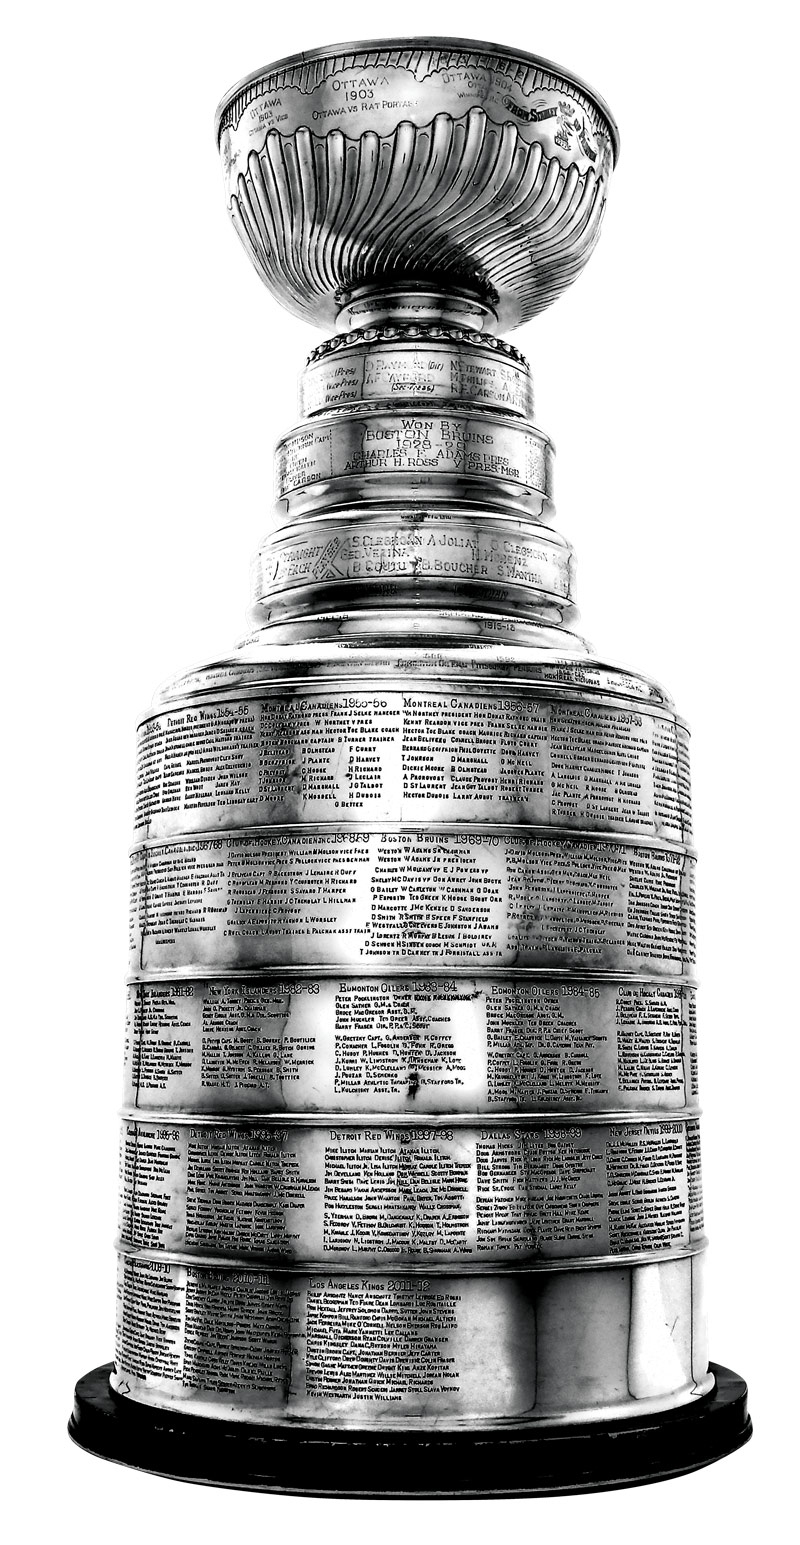 https://www.hhof.com/images_collection/stanleycup_clipped.jpg